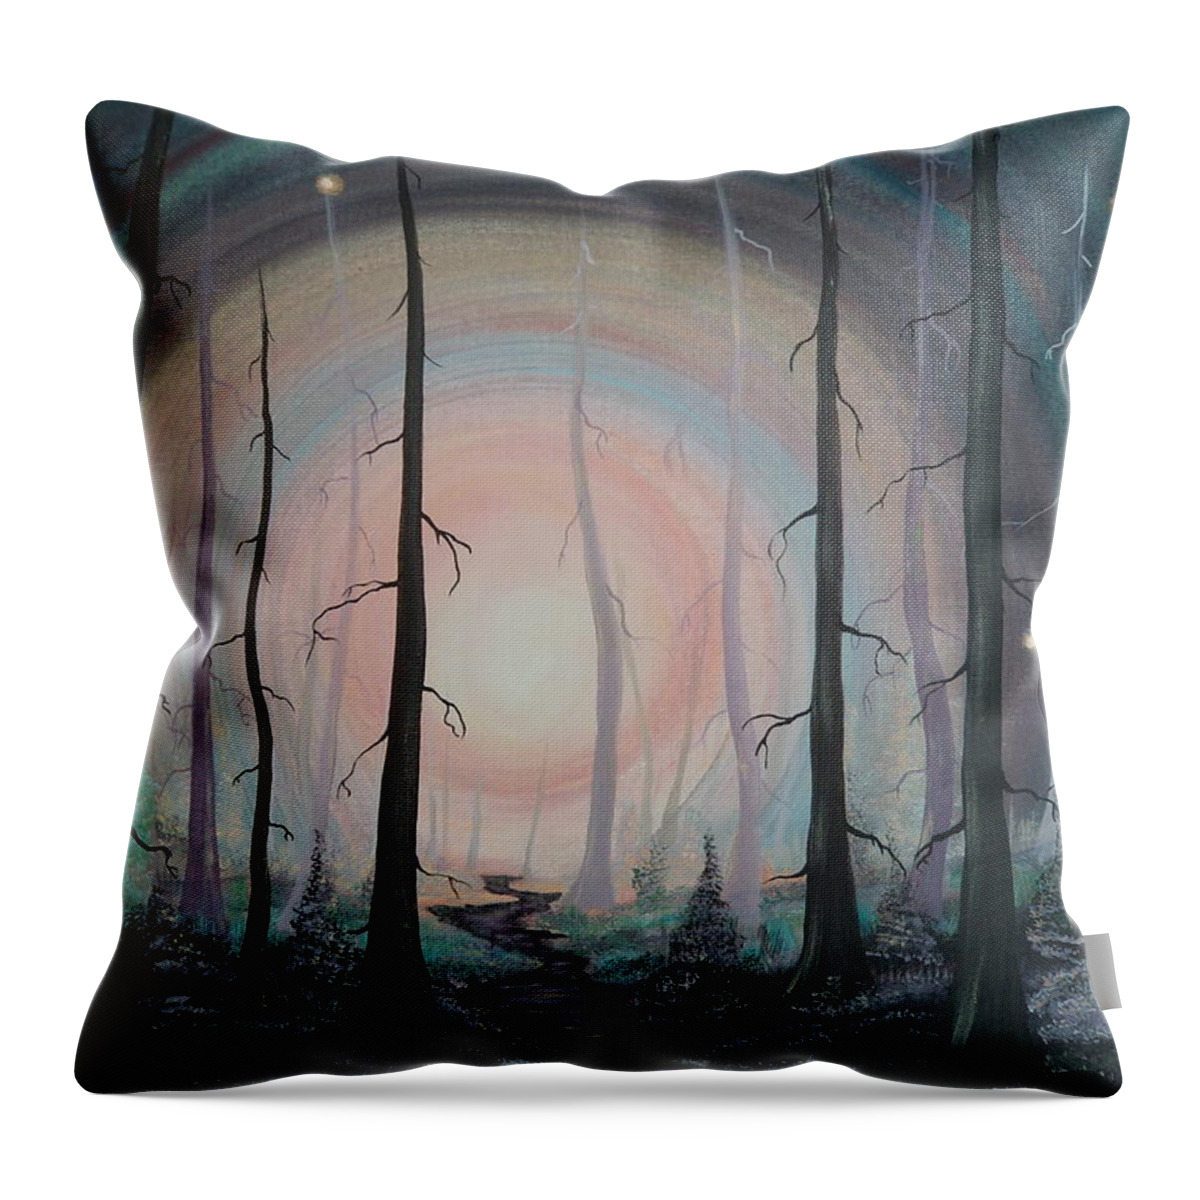 Woods Throw Pillow featuring the painting Magicle Forest by Krystyna Spink